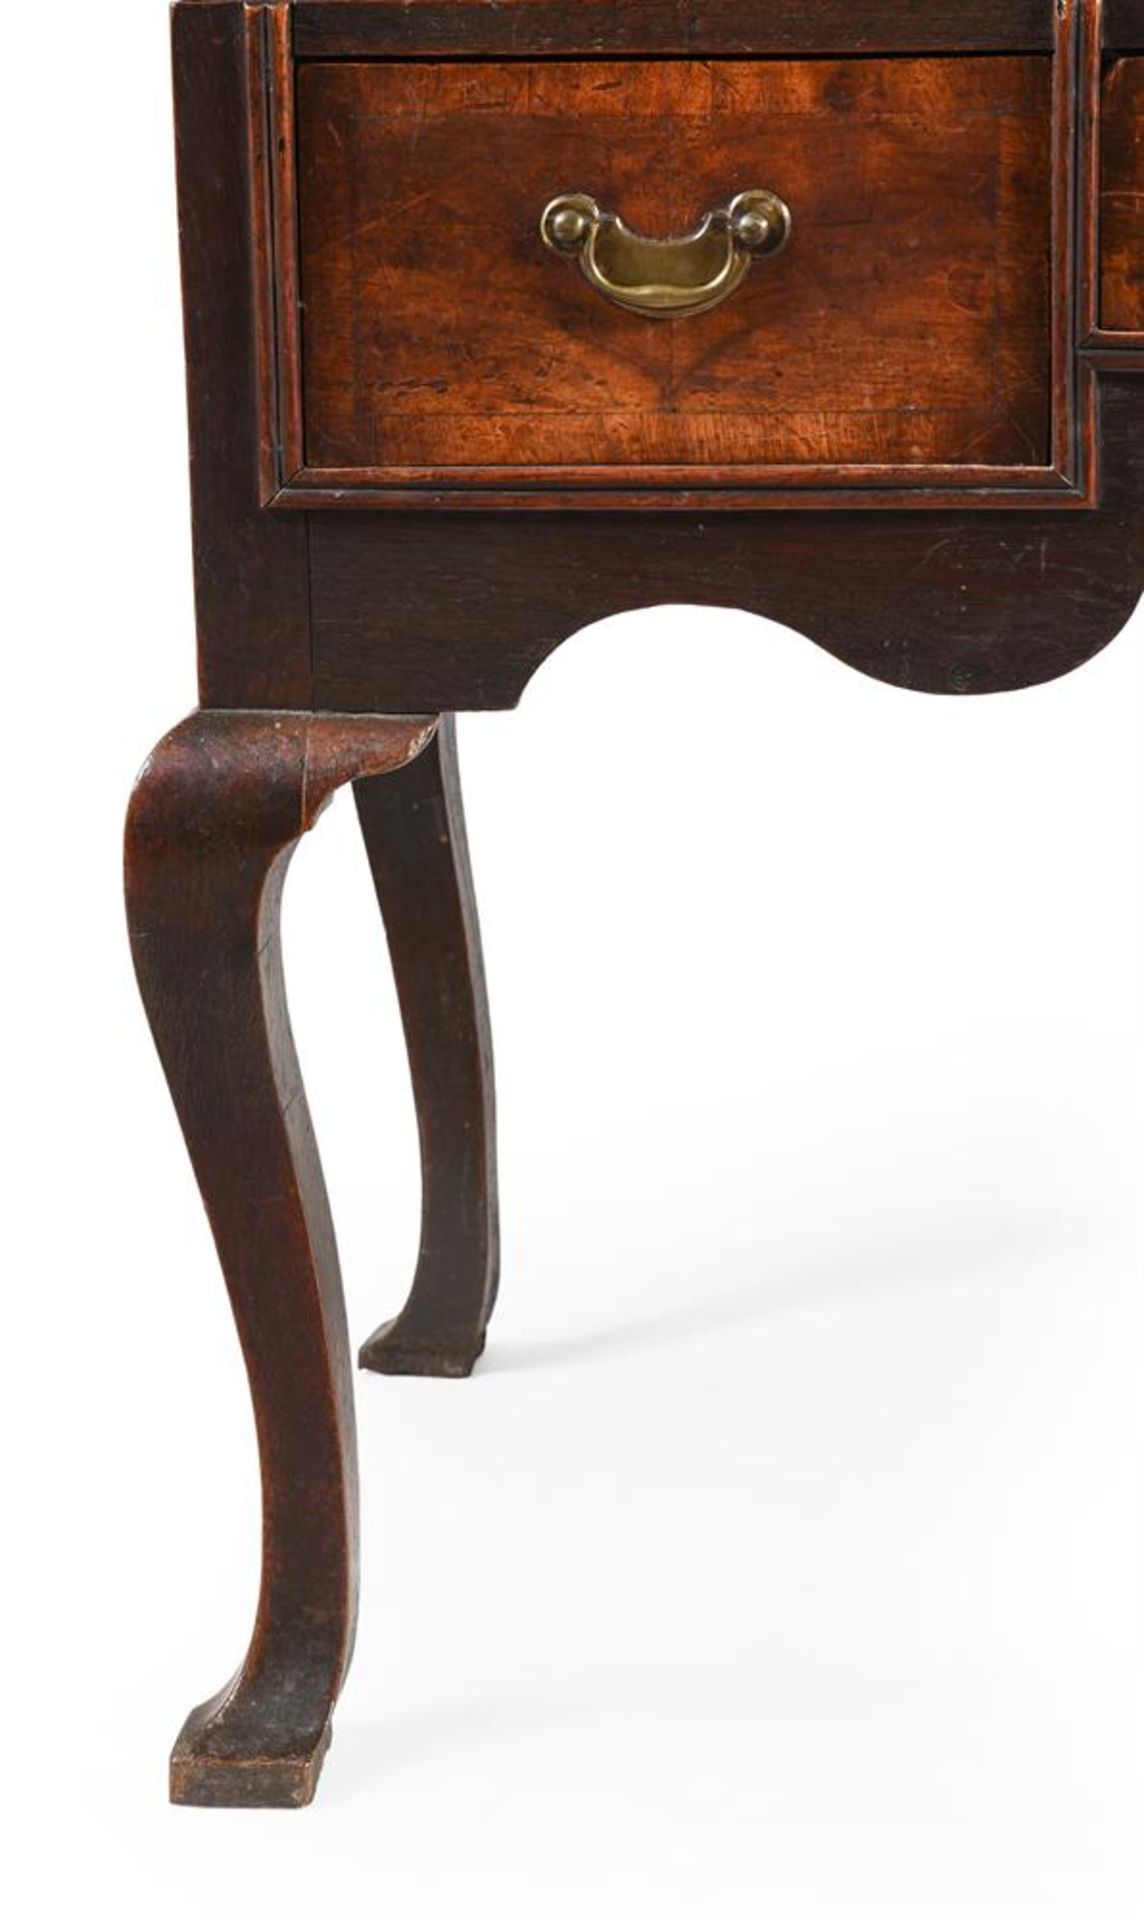 A GEORGE II WALNUT CHEST ON STAND, MID 18TH CENTURY - Image 3 of 3